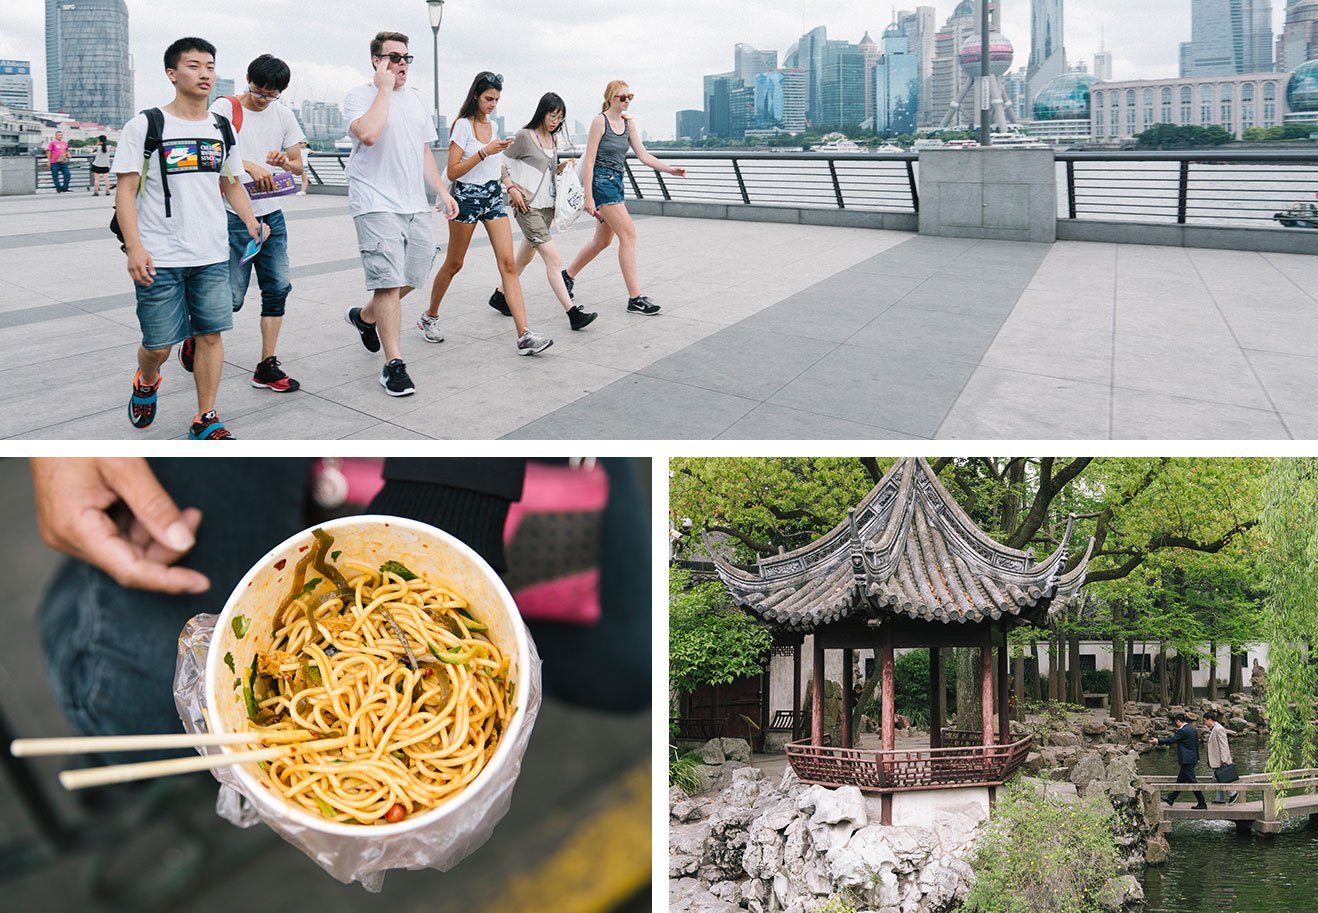 A collage of Shanghai moments. Image one: A group of students walking near the river with the city skyline in the background. Image two: A close-up of a bowl of noodles. Image three: A gazebo surrounded by trees near a body of water.